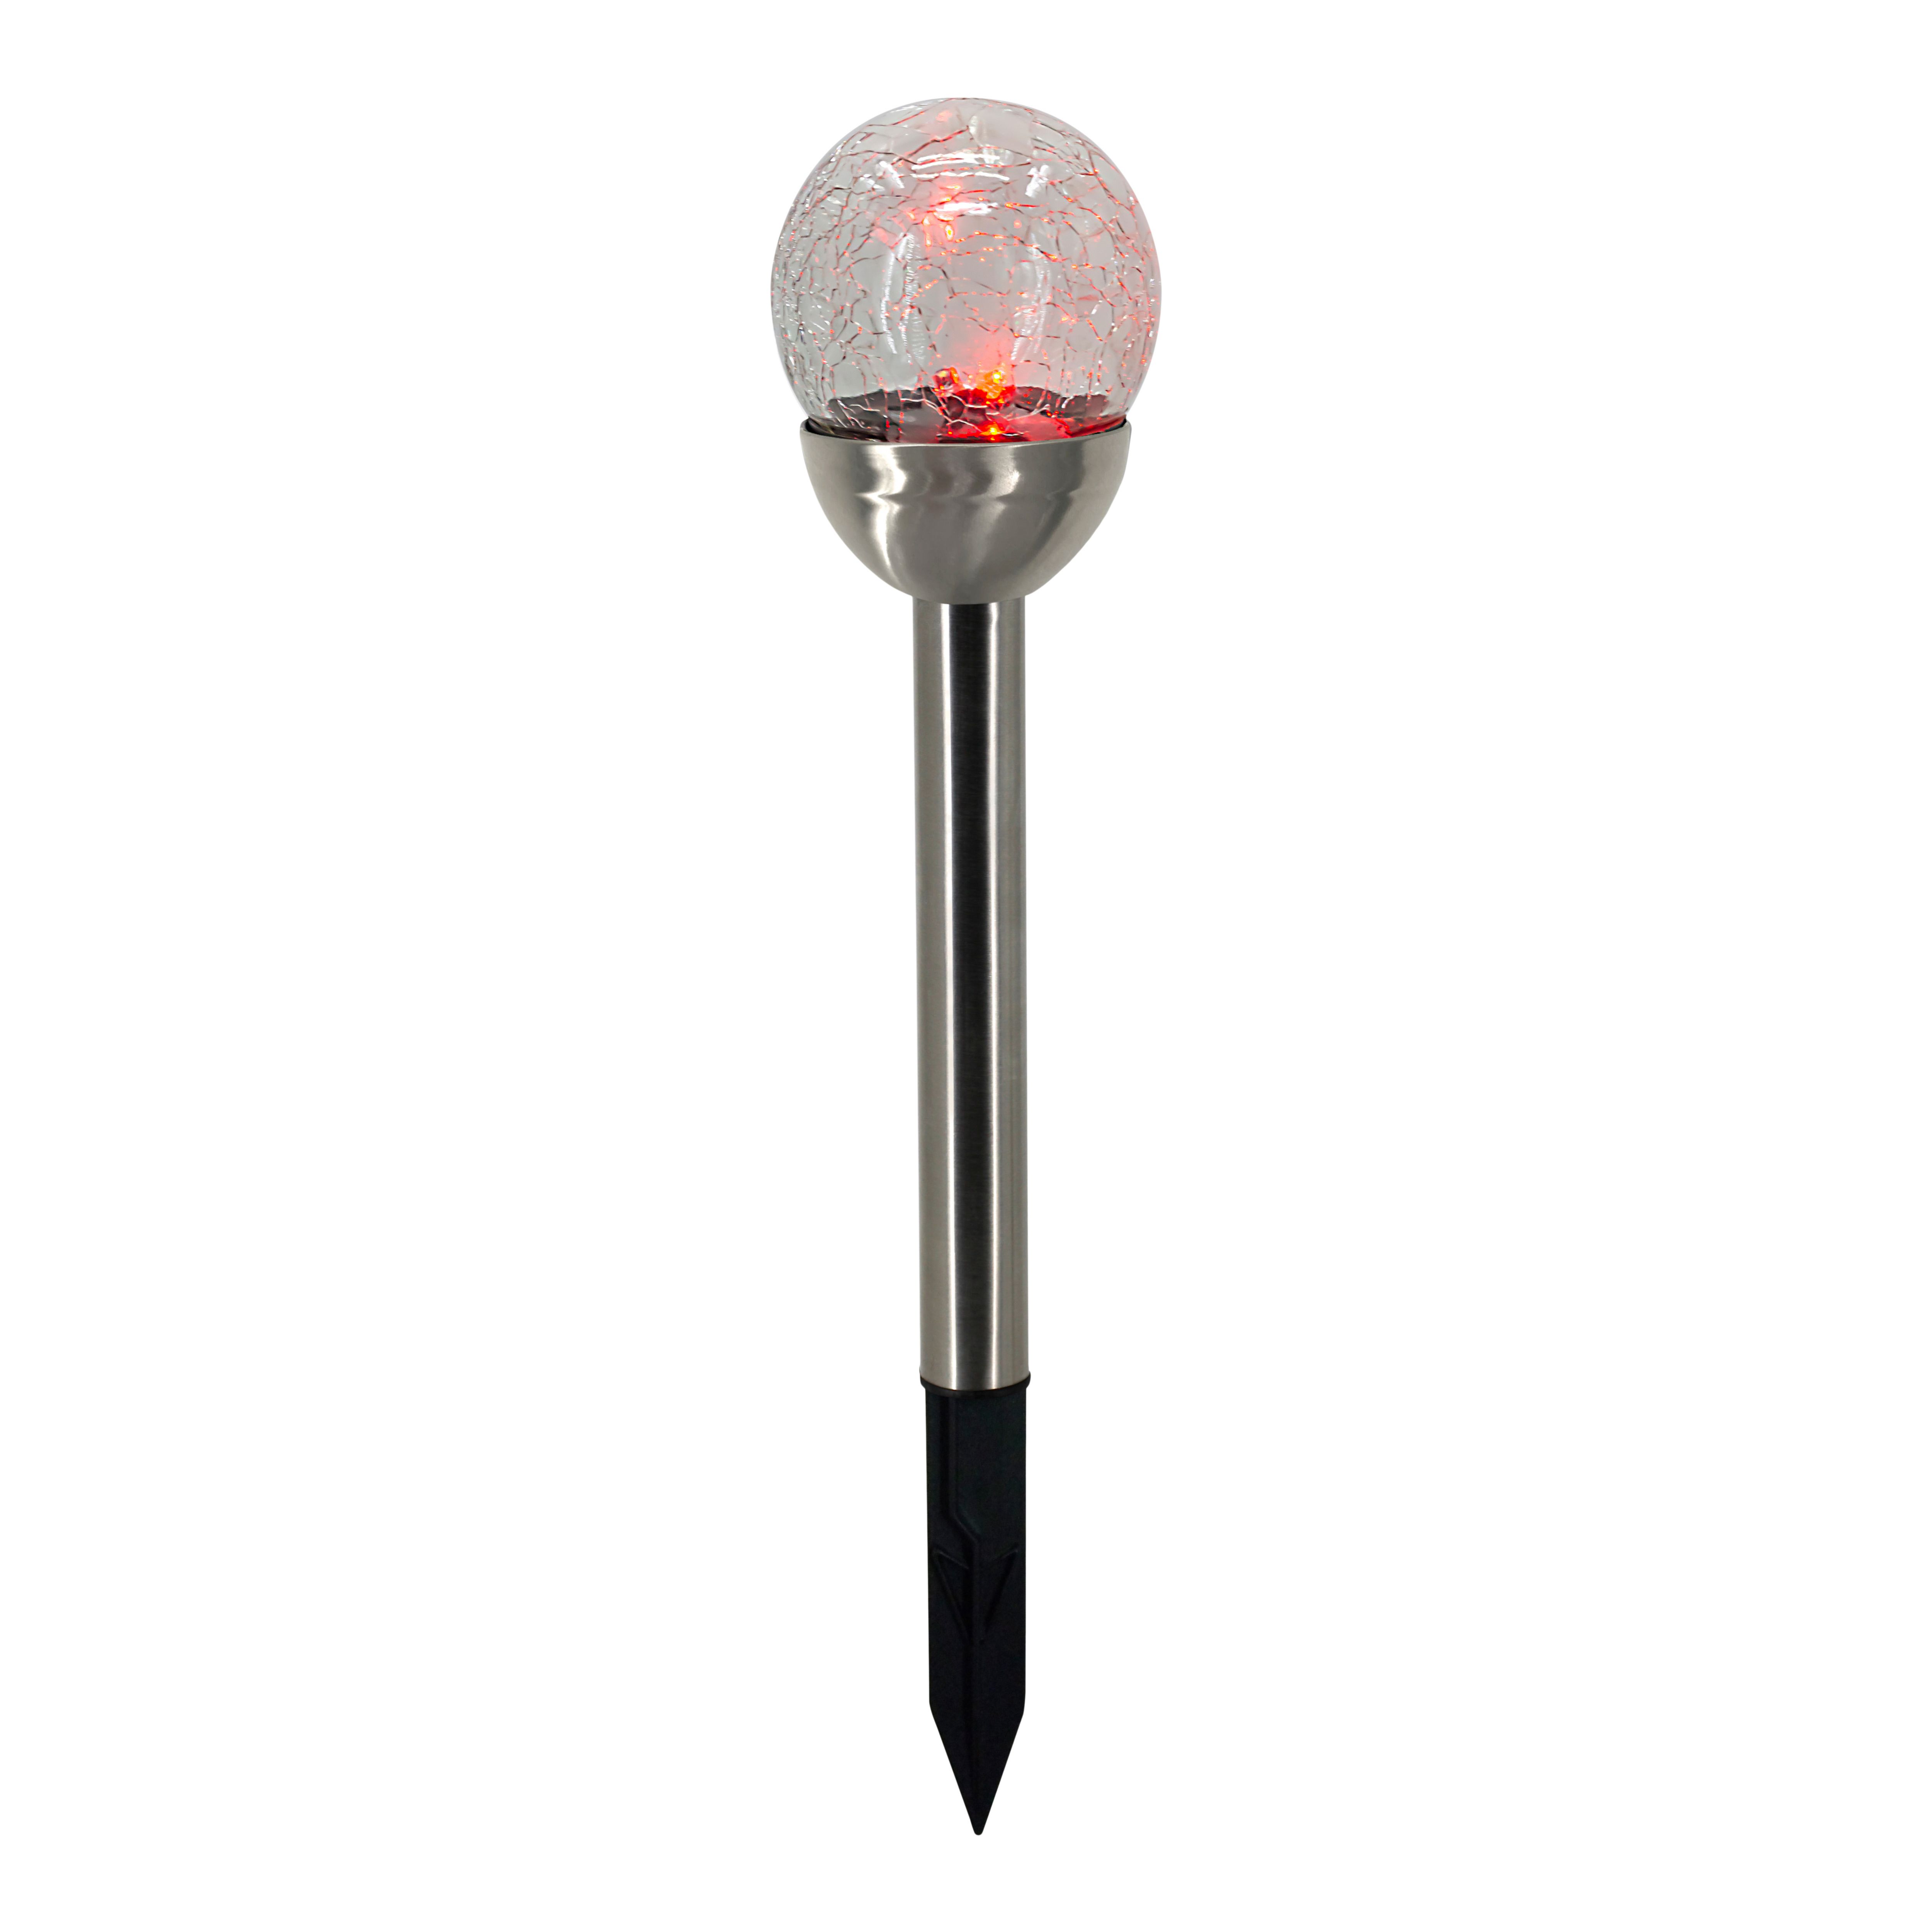 Silver & clear Crackle effect Solar-powered Integrated LED Outdoor Stake light